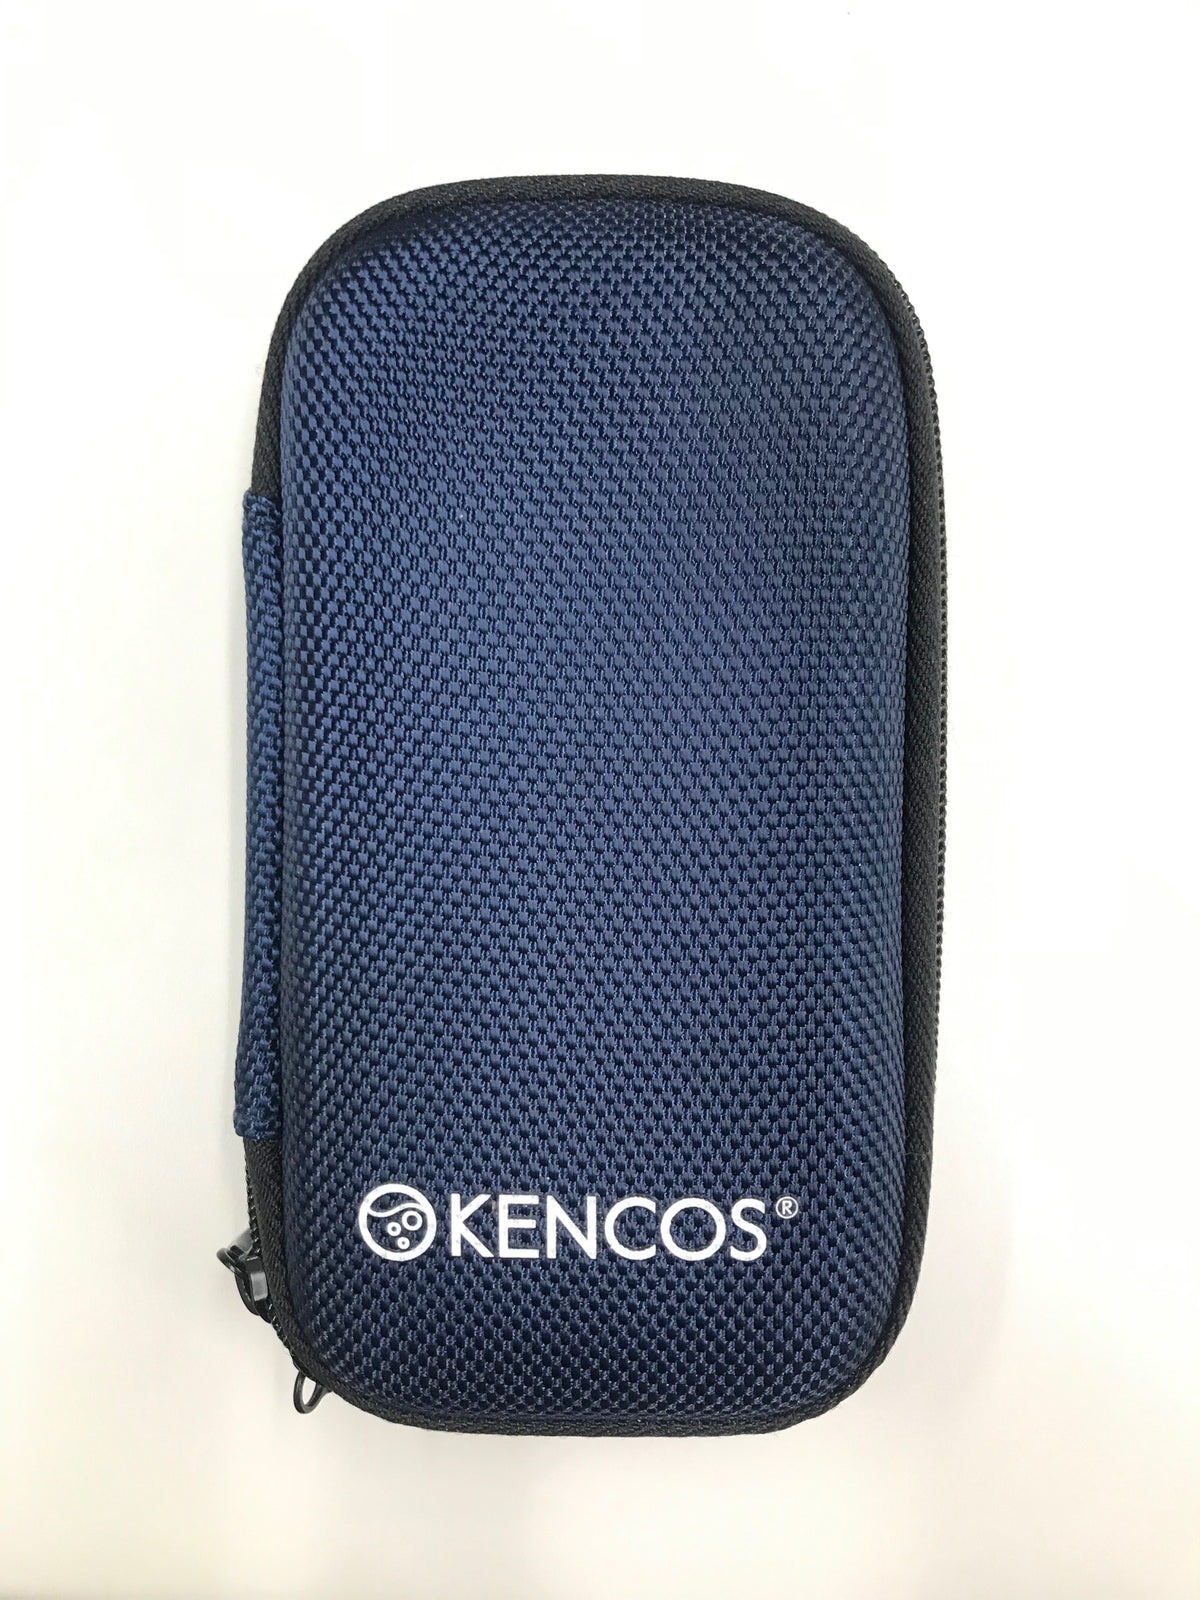 Kencos Carrying Case